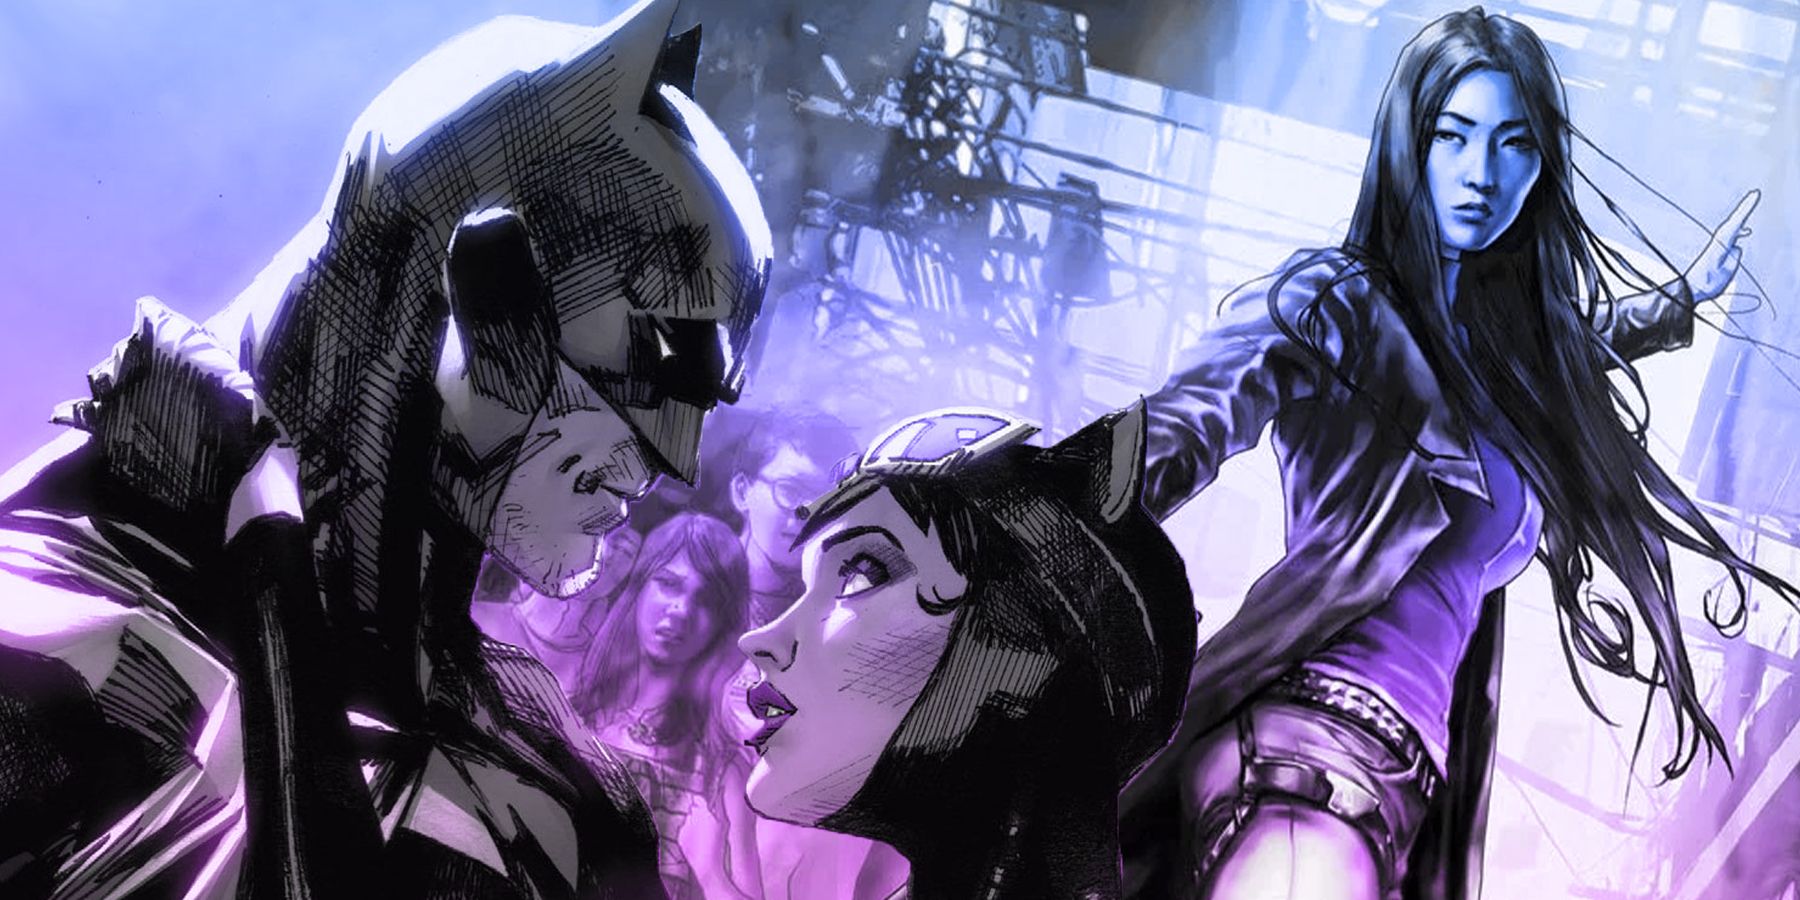 Batman and Catwoman with Lady Shiva in the background